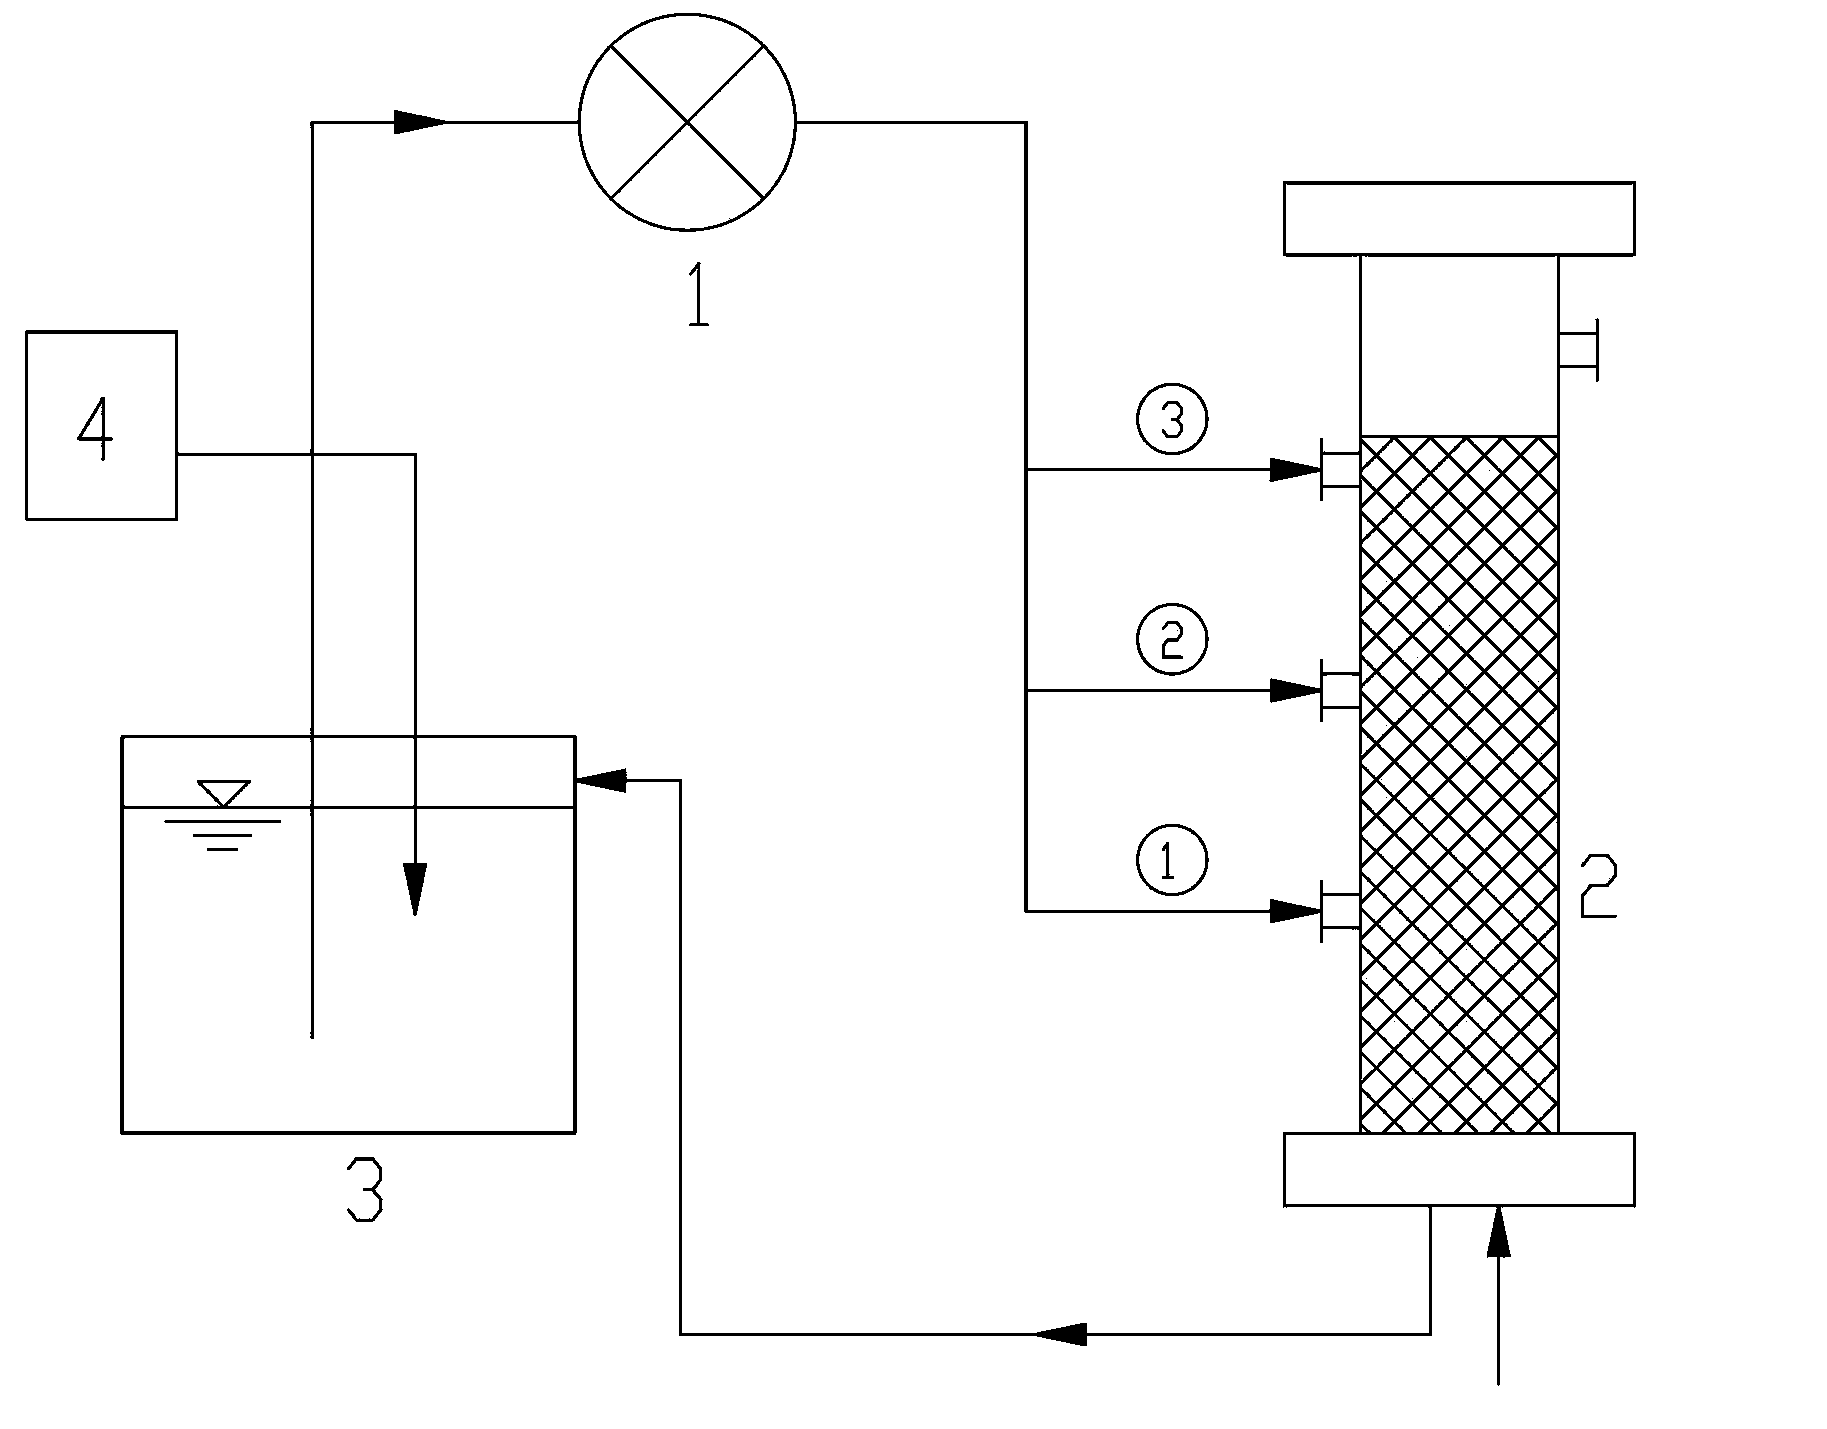 Layering sequence fixing method for improving attached biomass of compound bacteria to surface of carrier